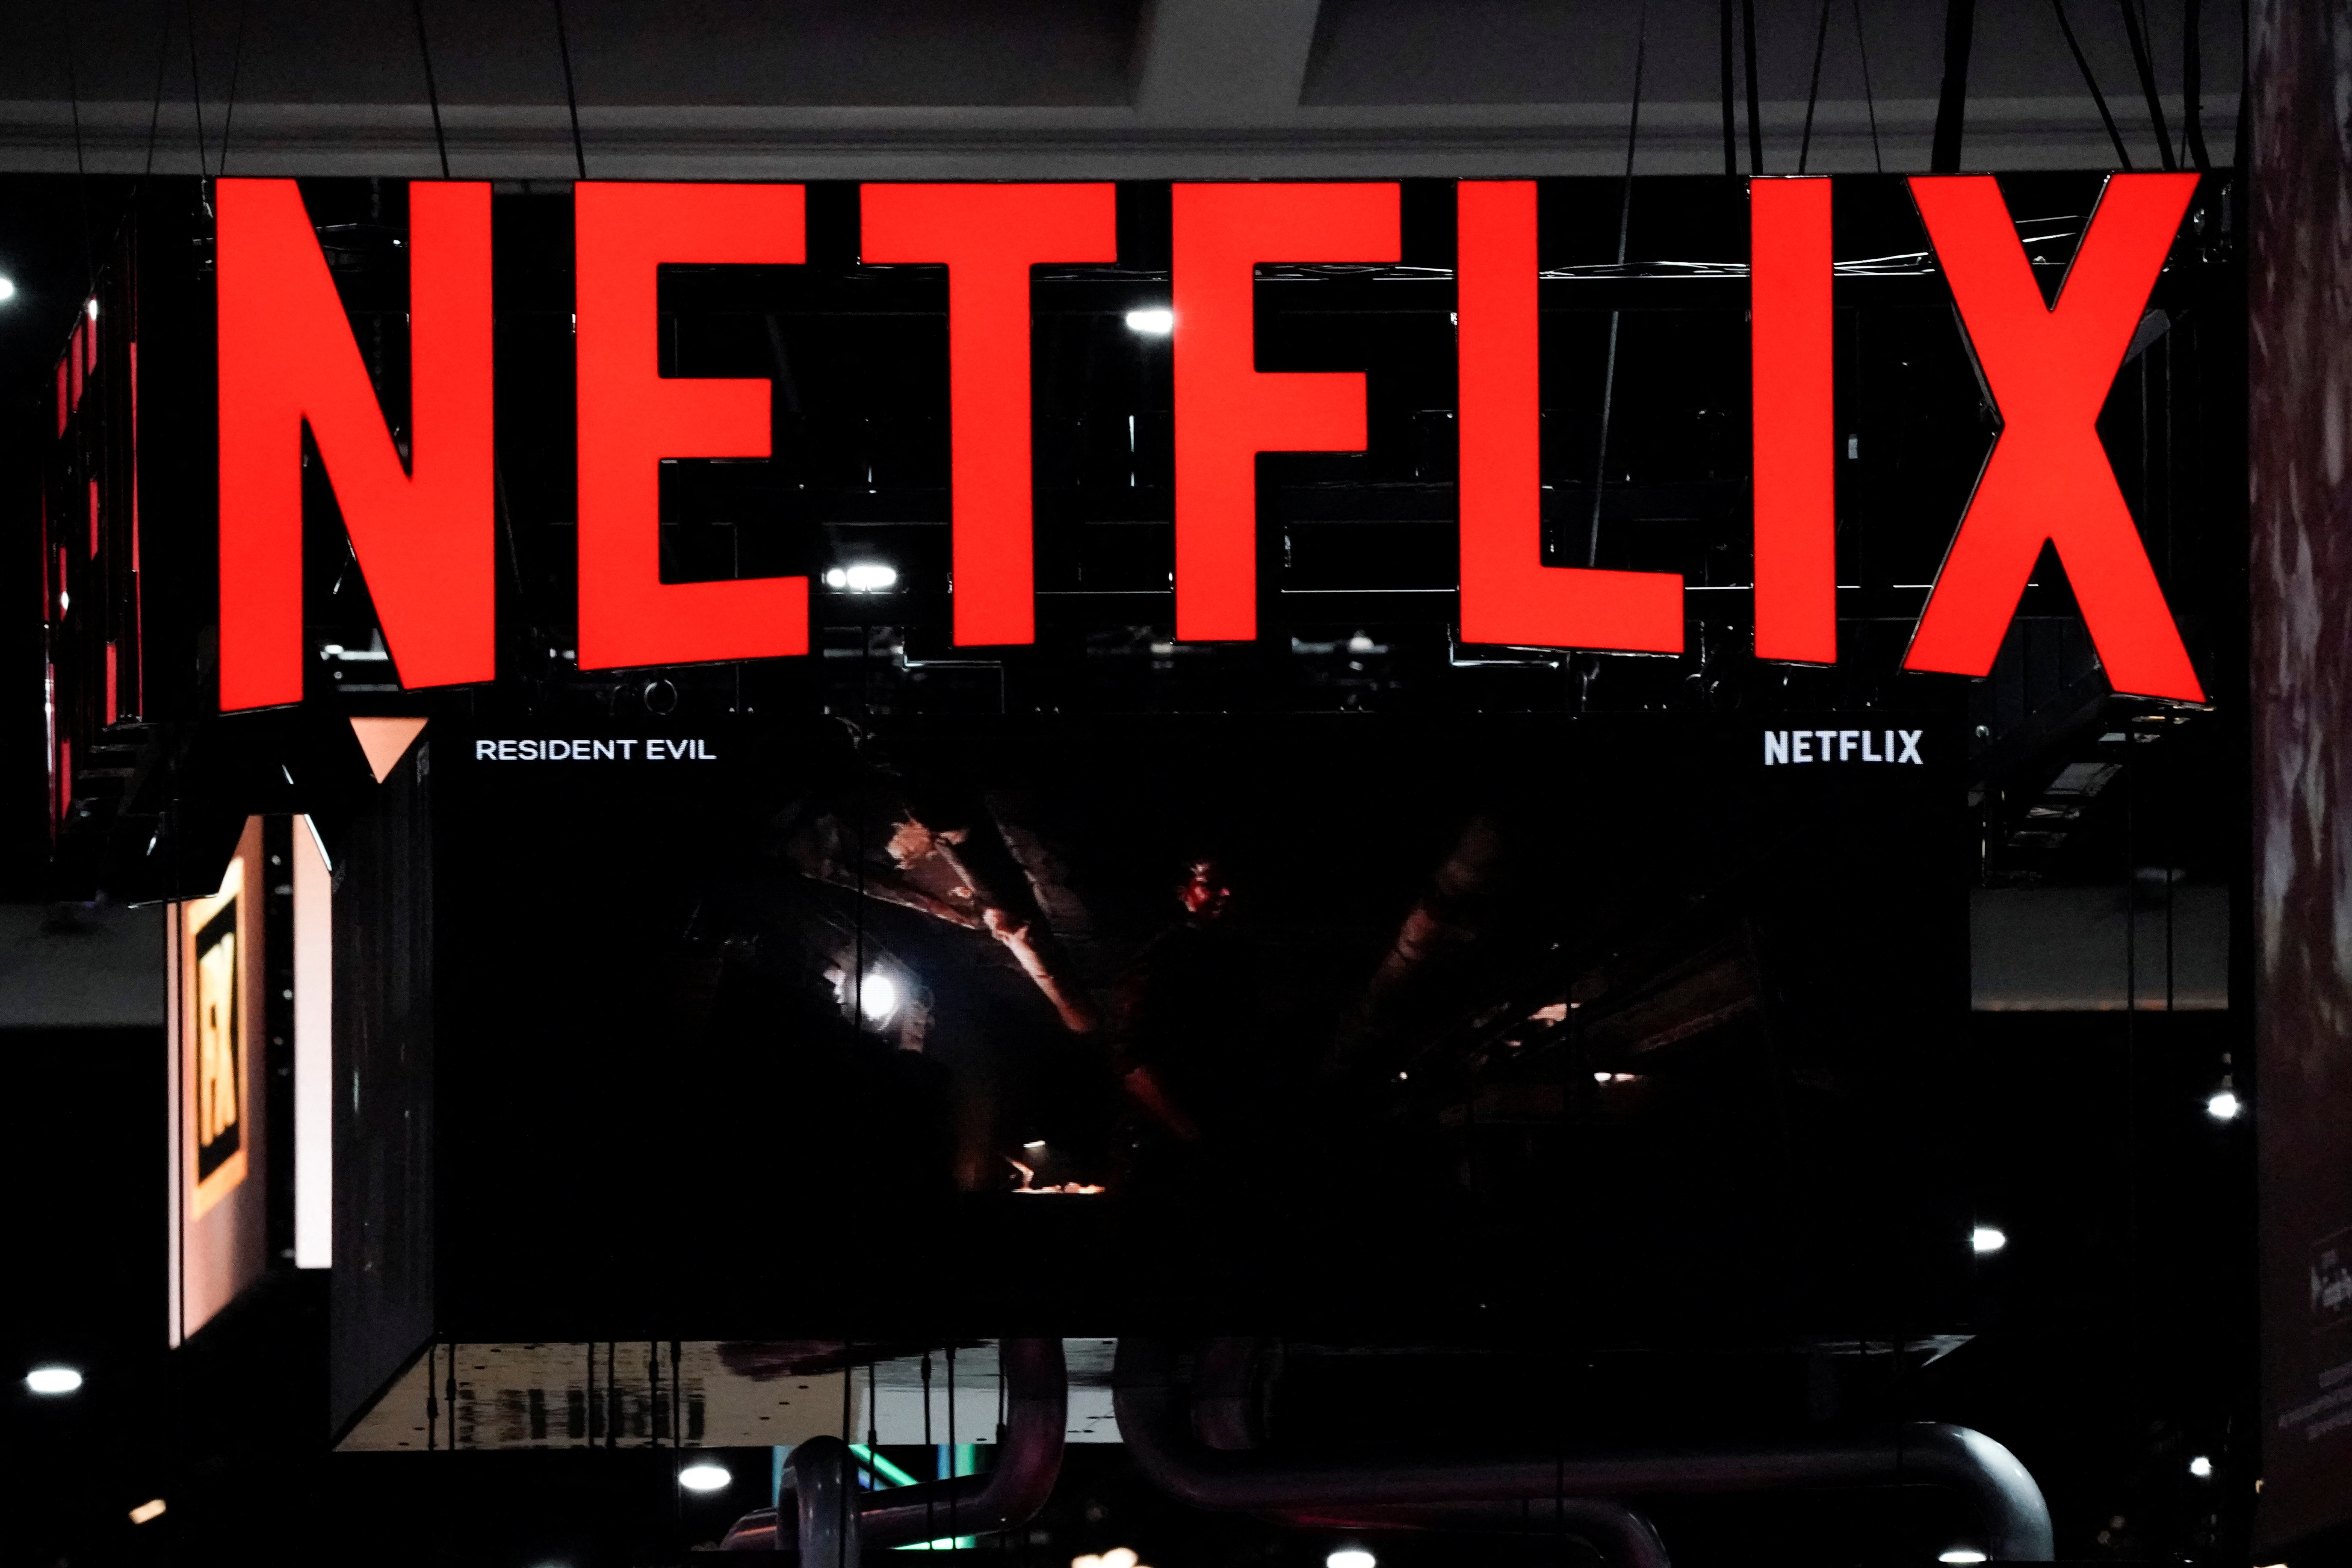 Netflix stock sinks after reported ad target miss as analysts warn of 'competitive disadvantage'